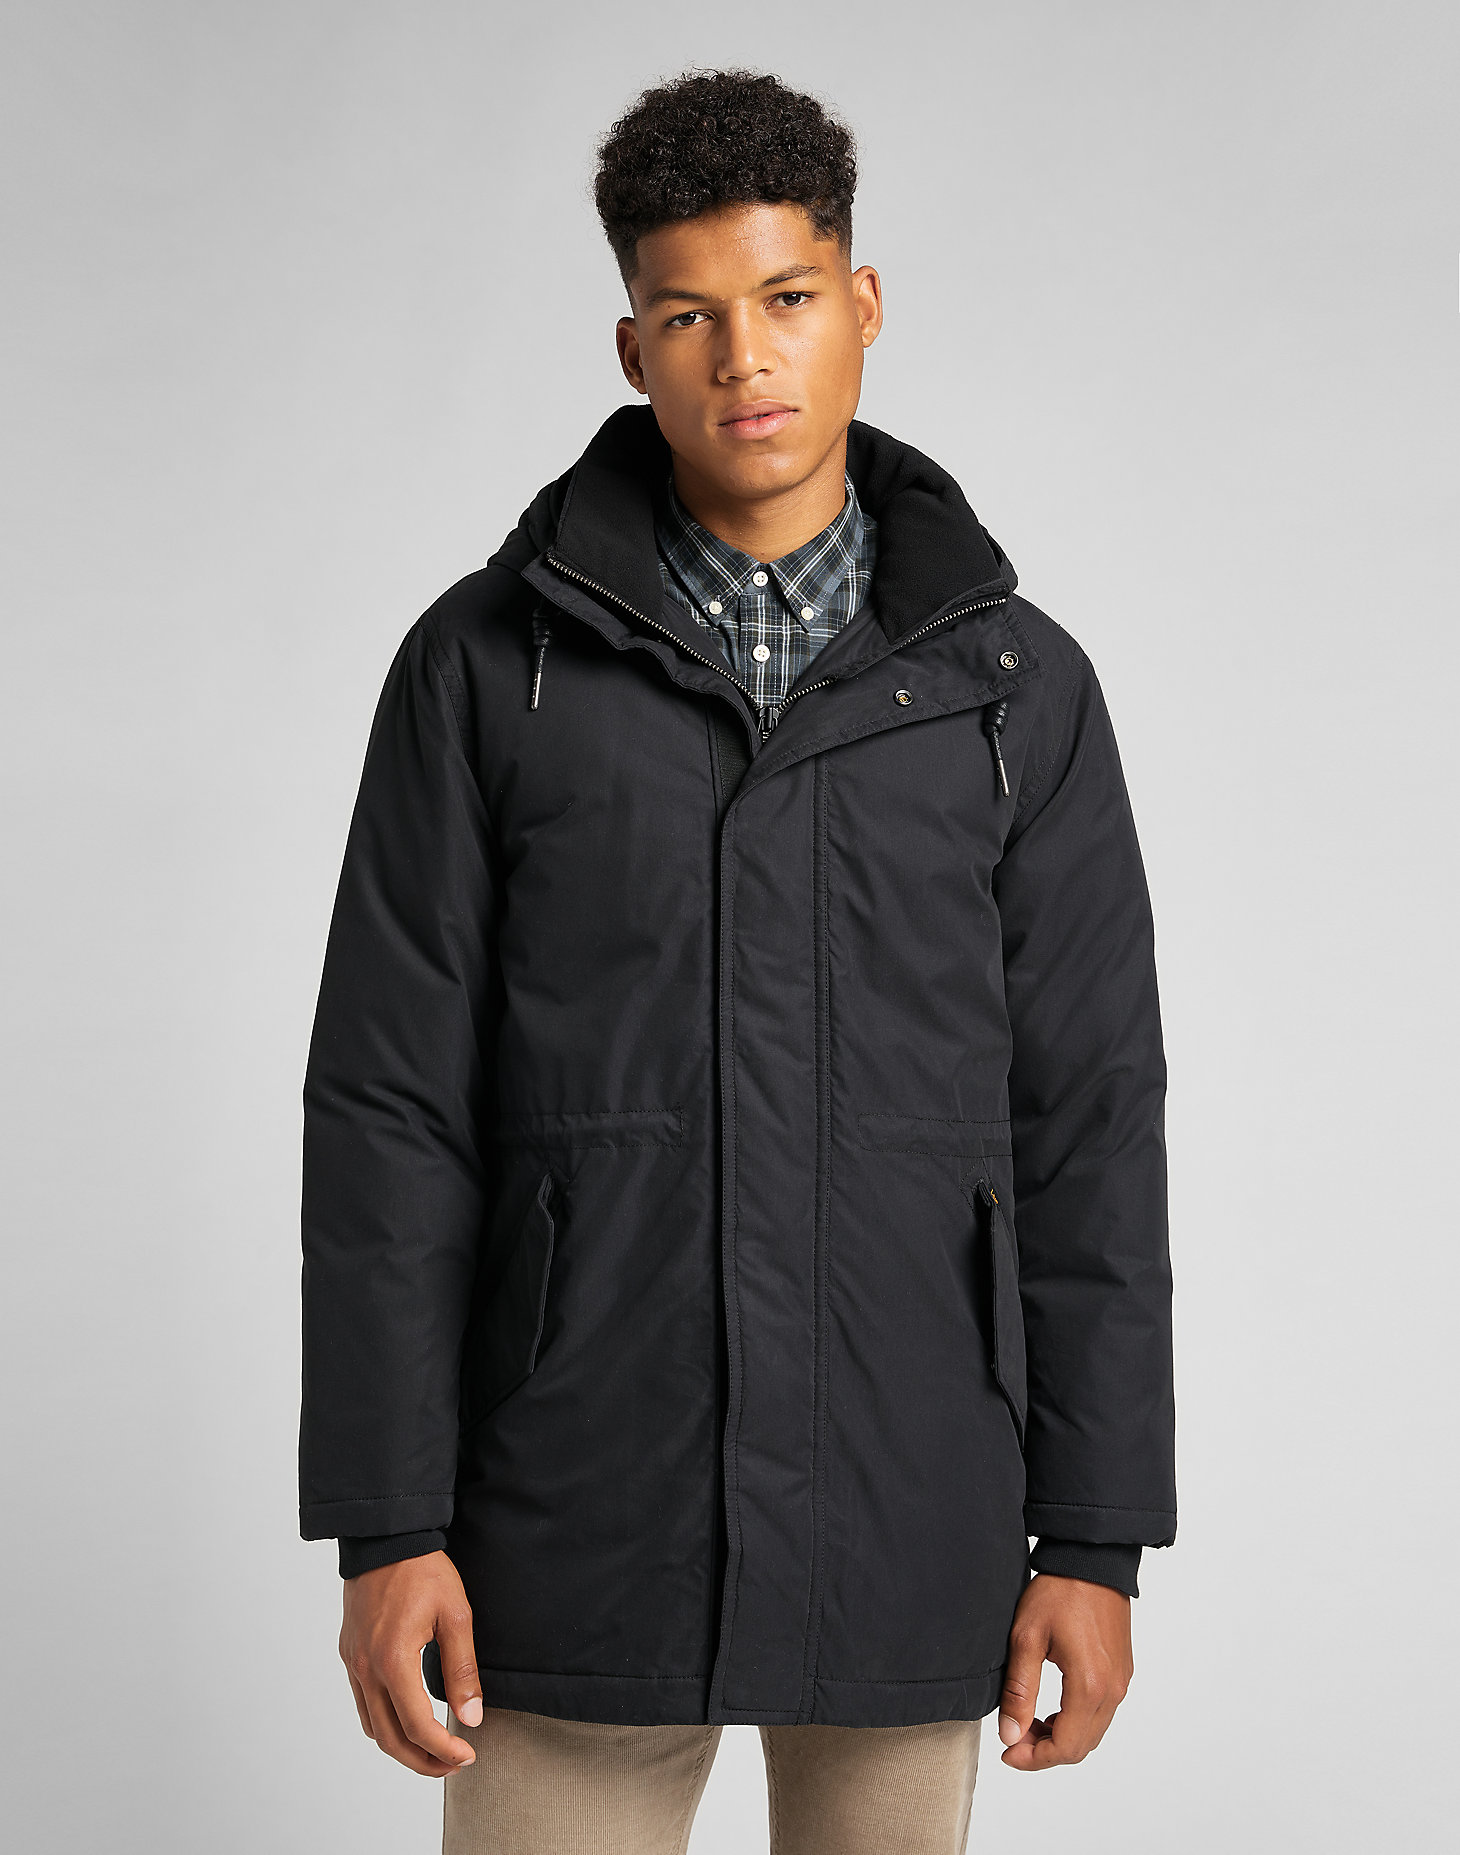 Essential Parka in Black main view